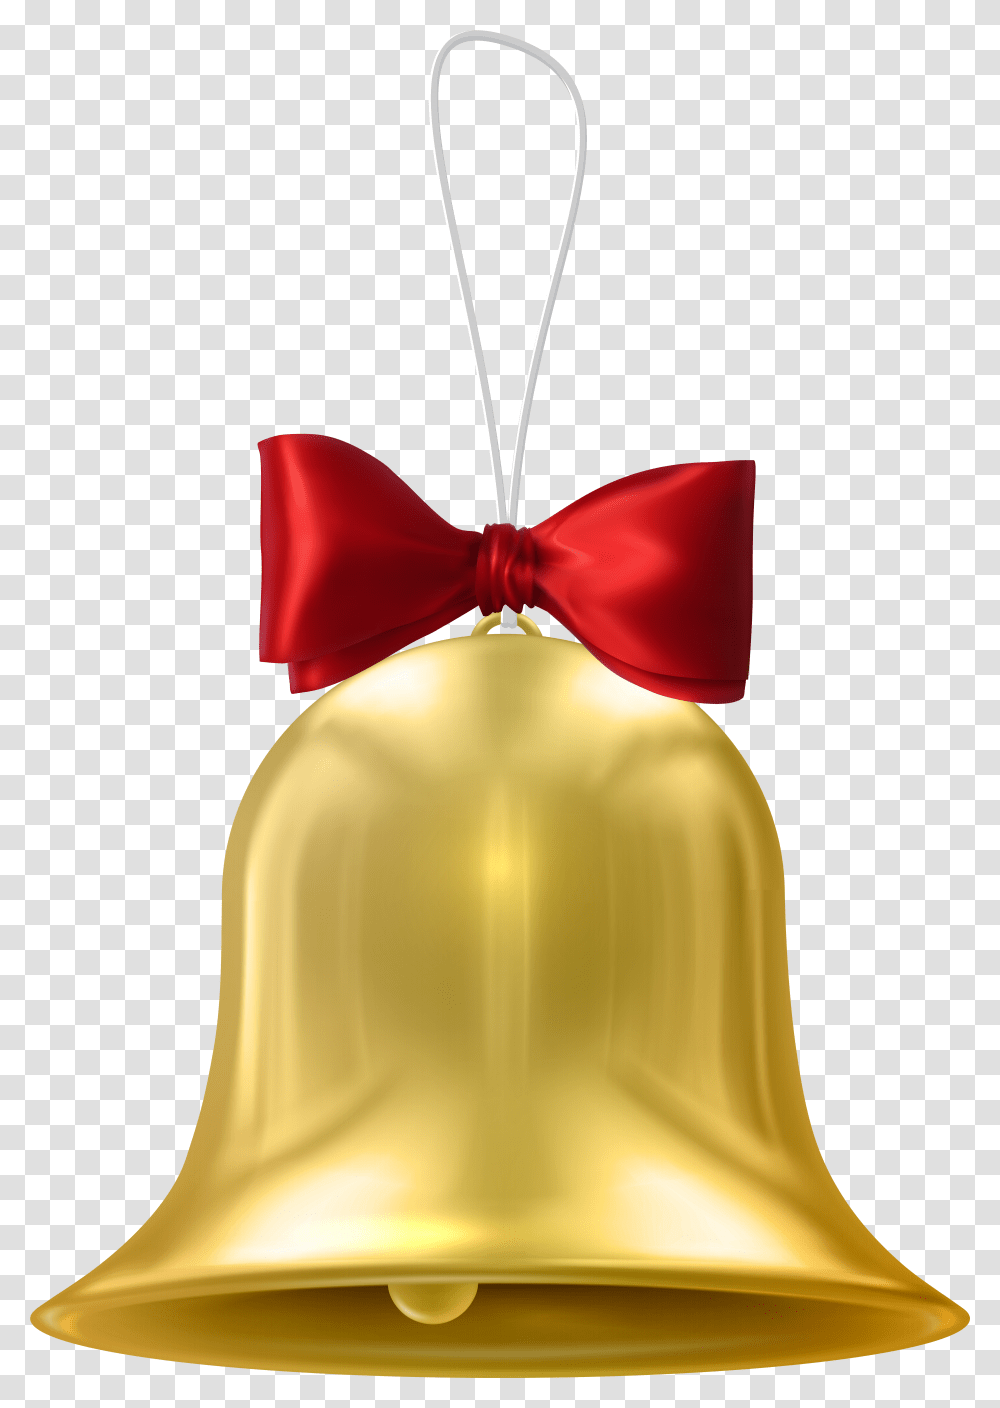 Christmas Gold Bell Clip Art Christmas Bells In Silver Colour Transparent Png